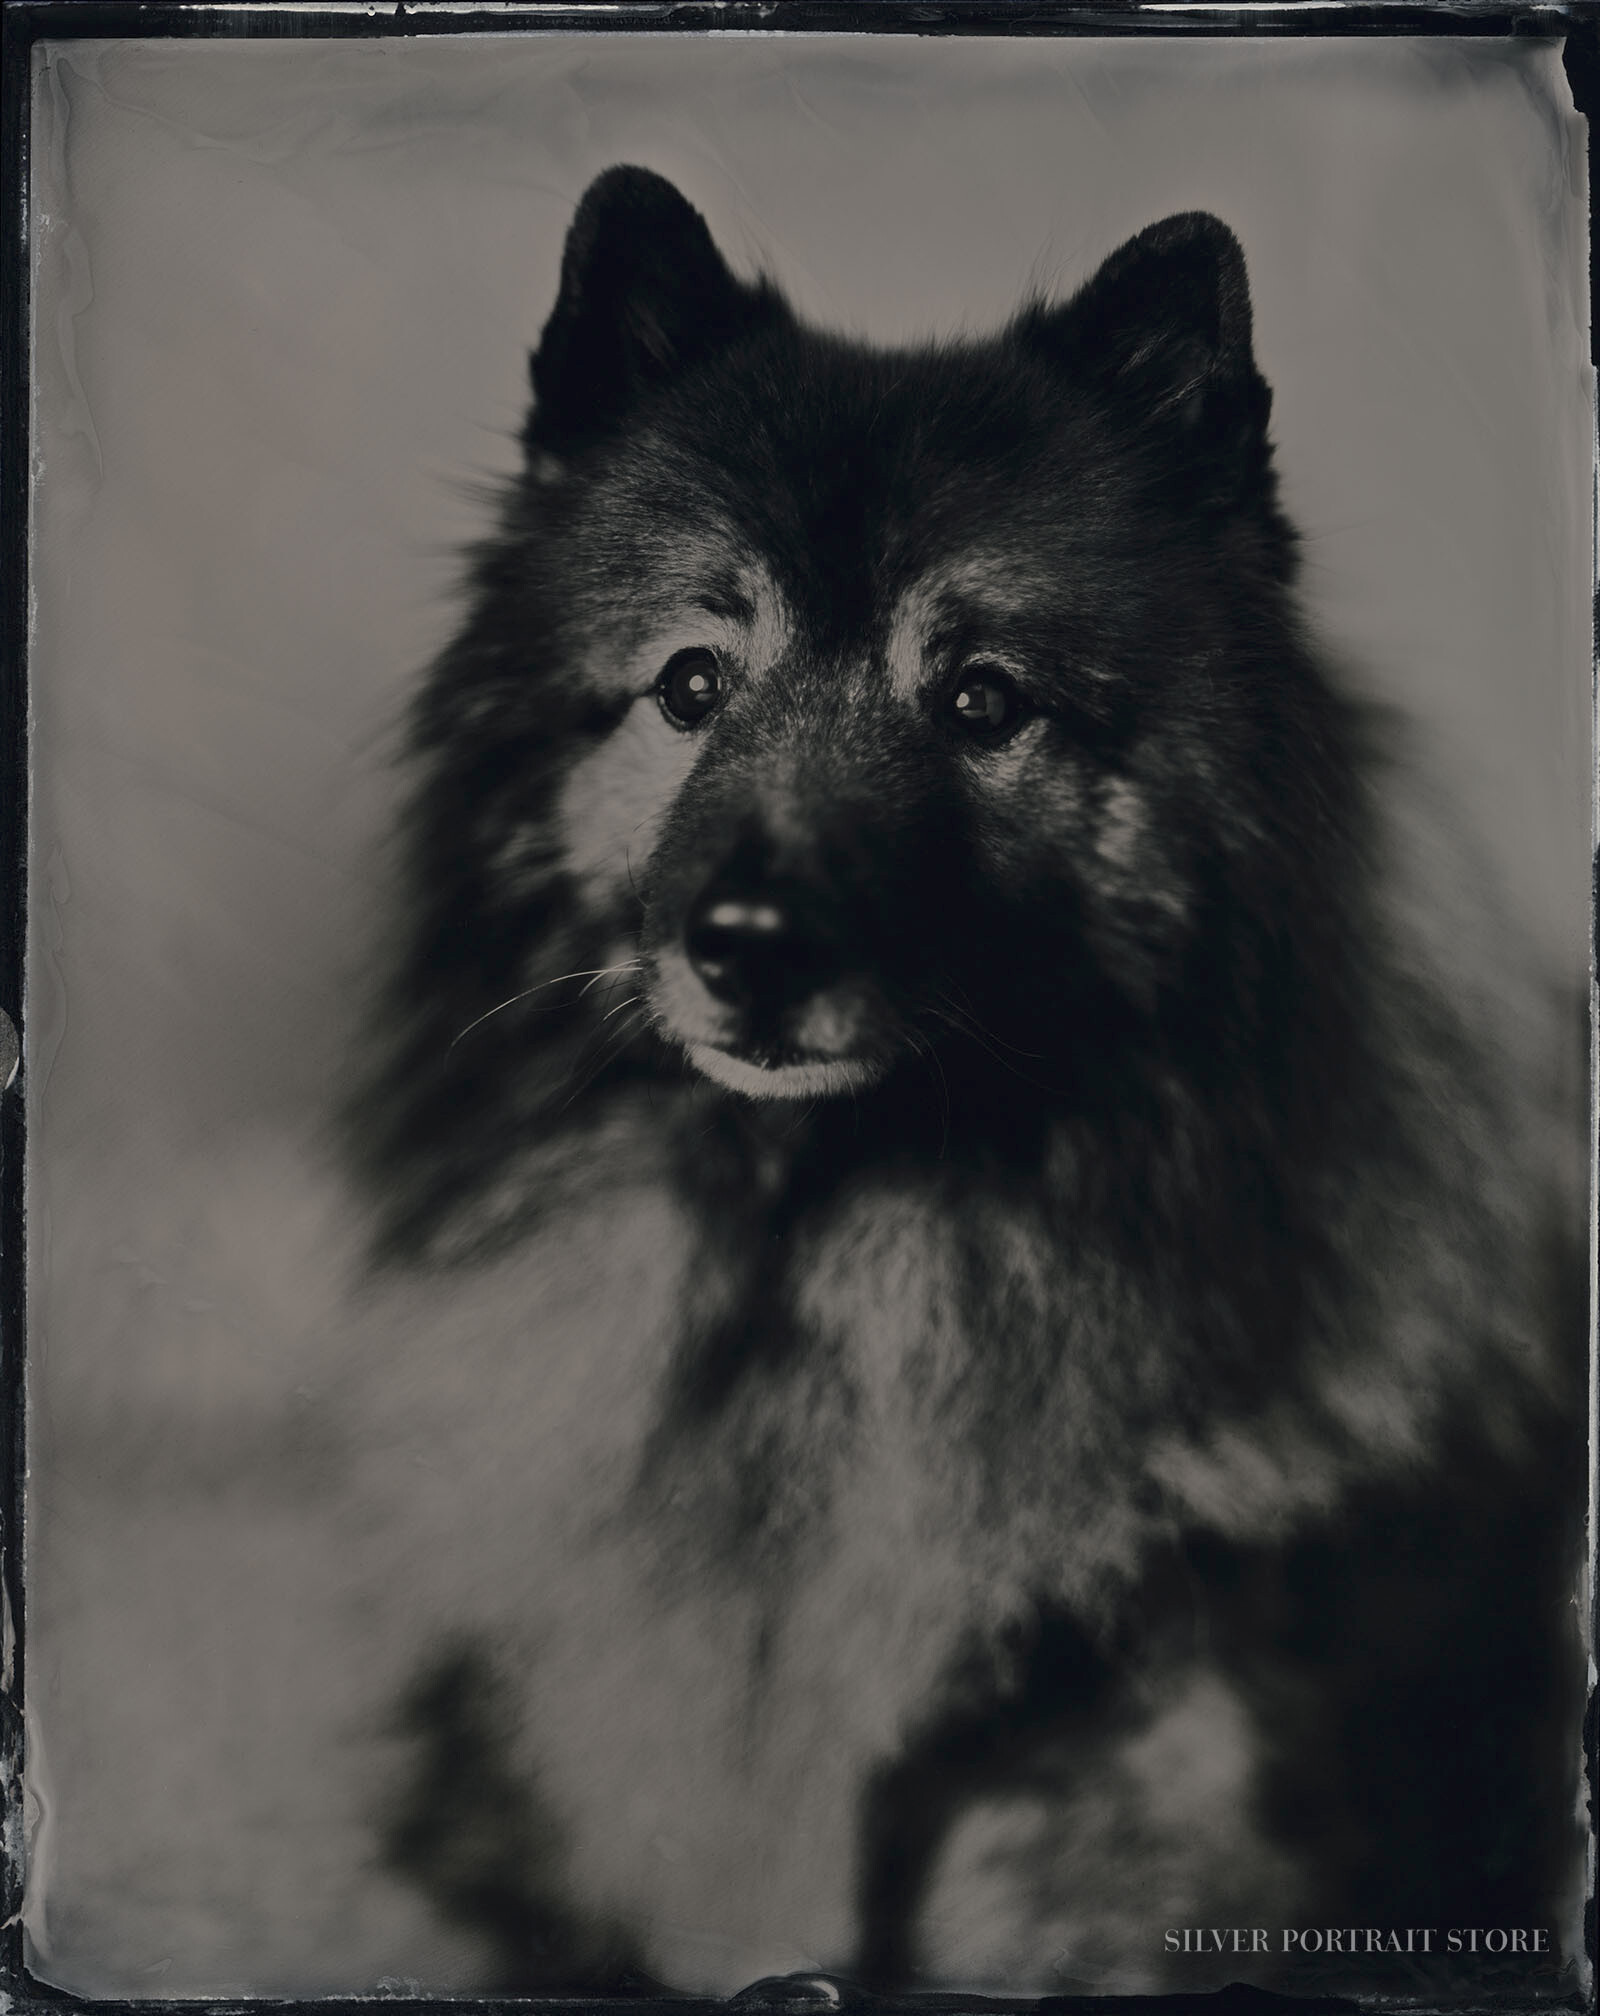 Kasper-Silver Portrait Store-Scan from Wet plate collodion-Tintype 20 x 25 cm.